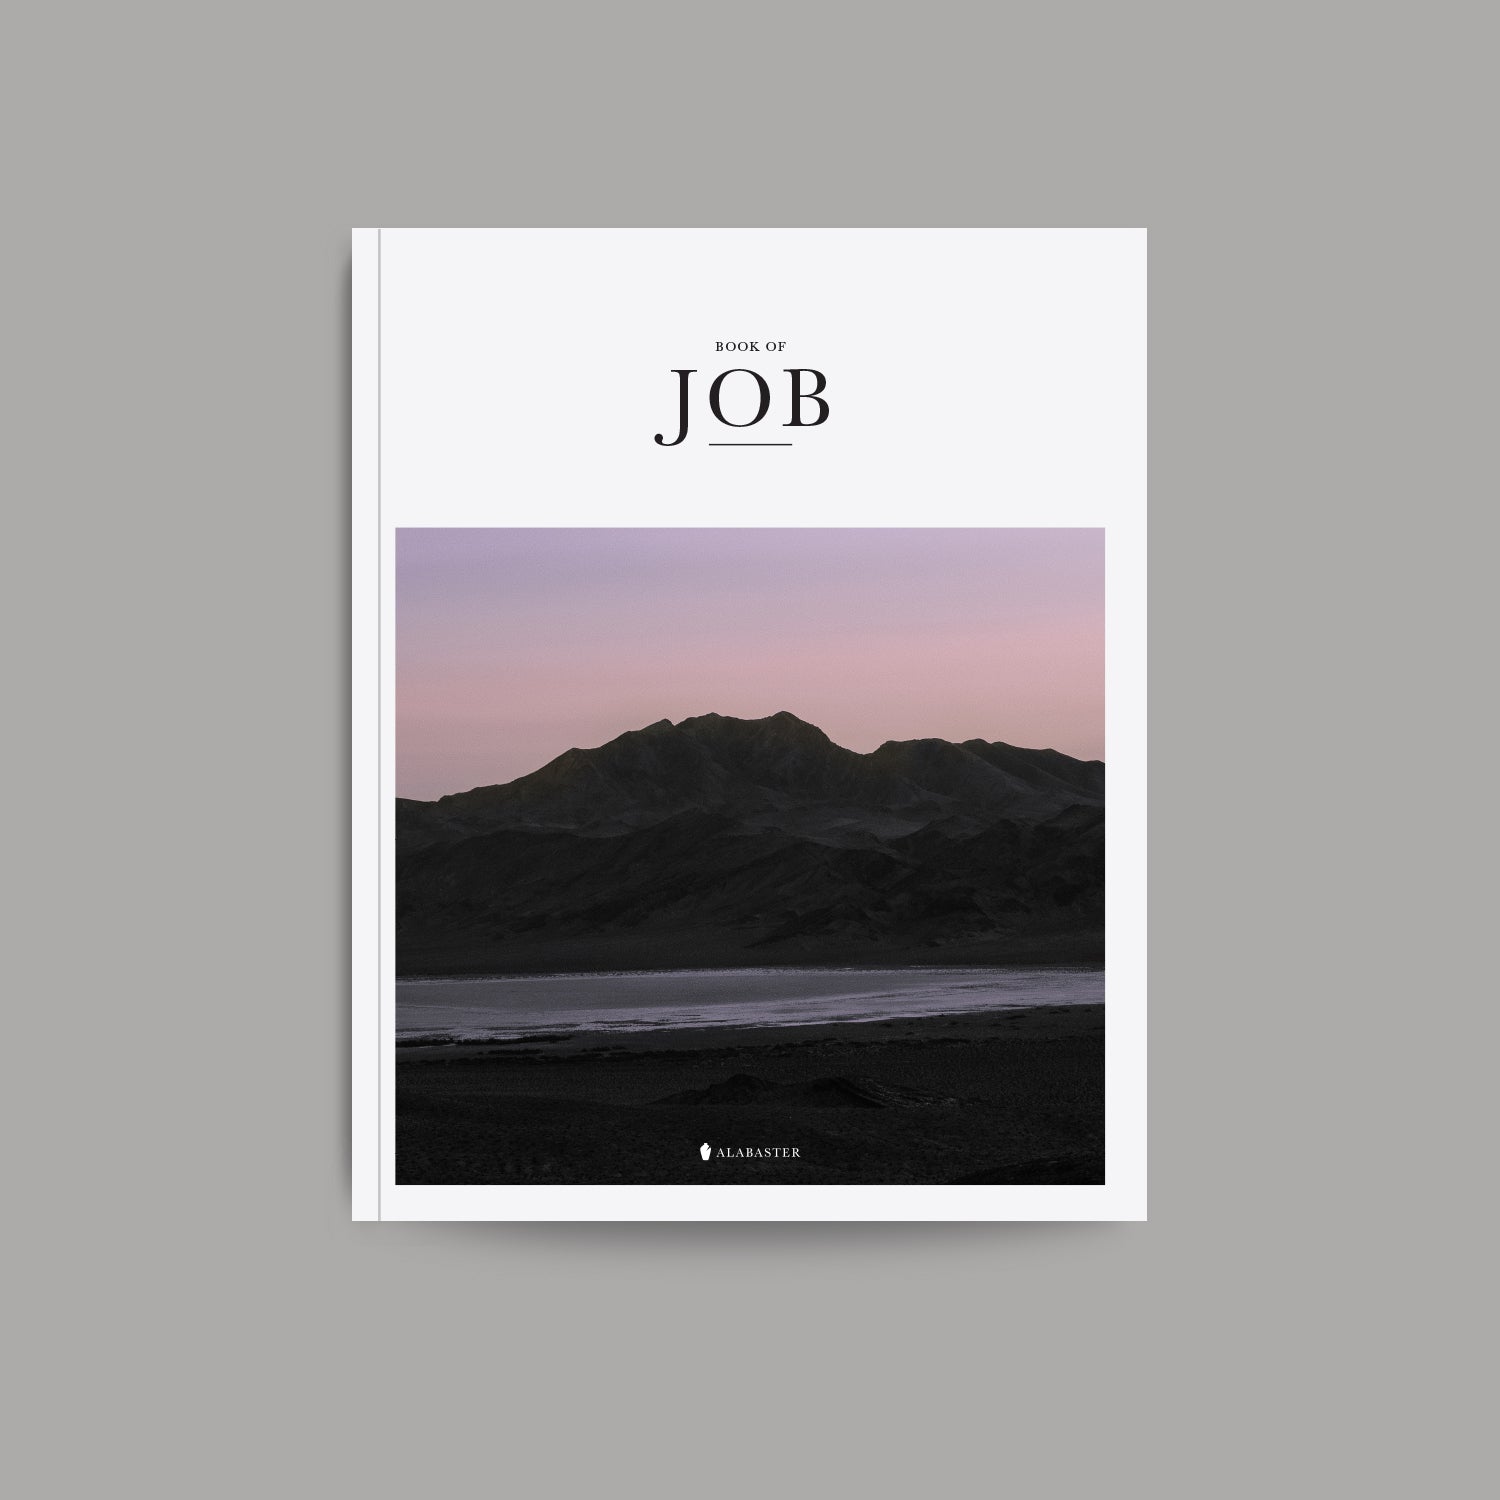 The Book of Job softcover